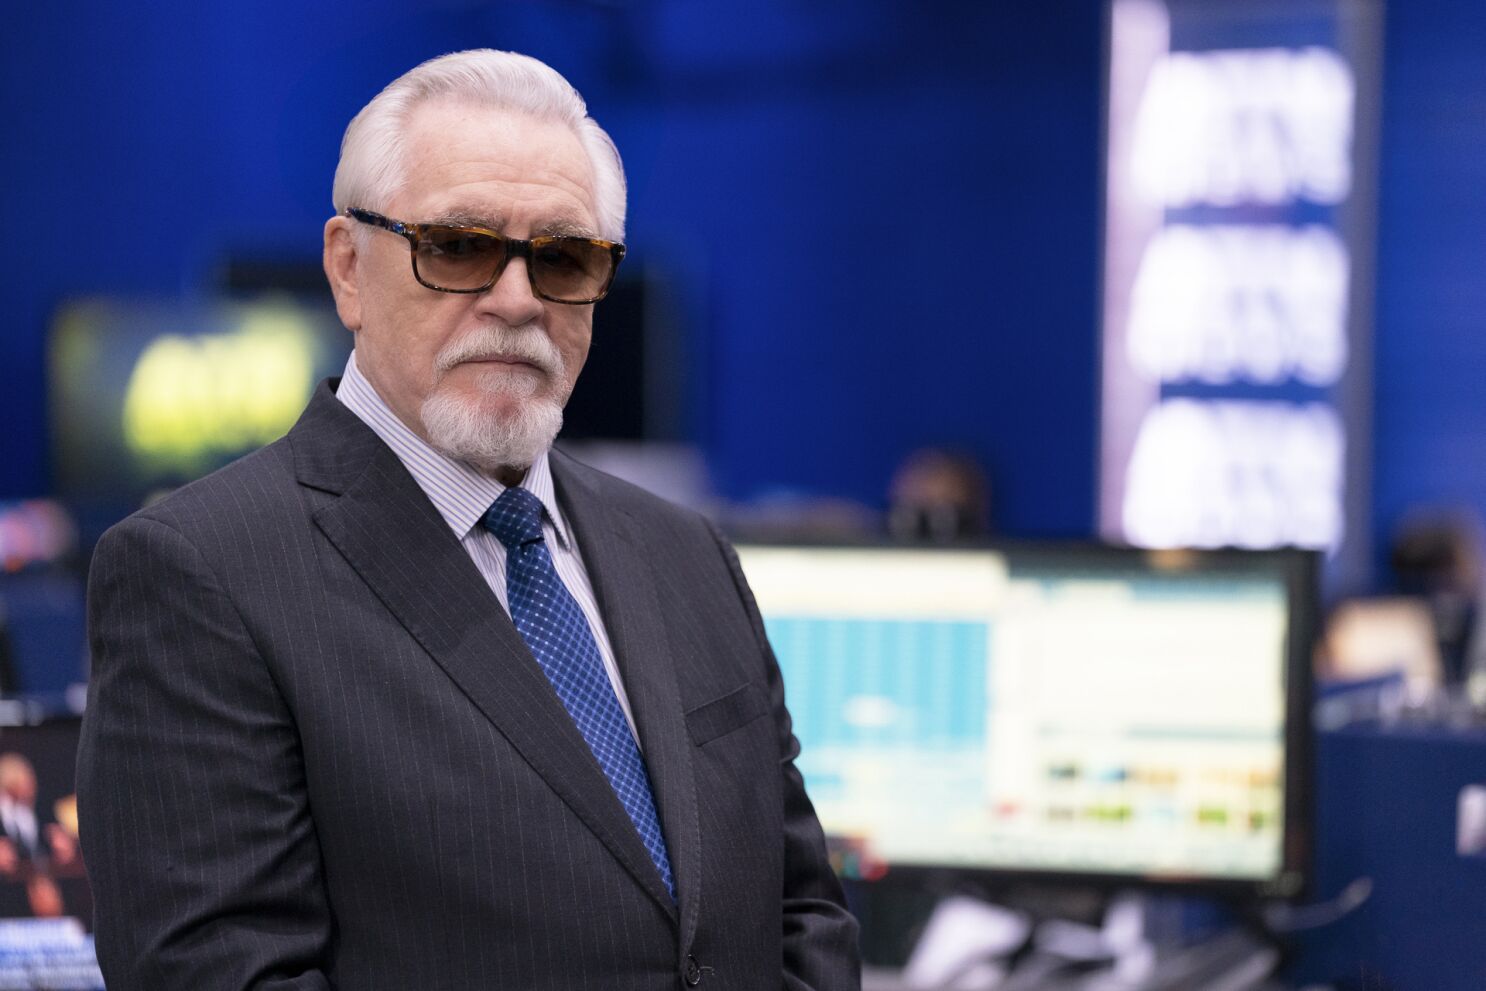 Brian Cox as Logan Roy, wearing sunglasses in the offices of ATN